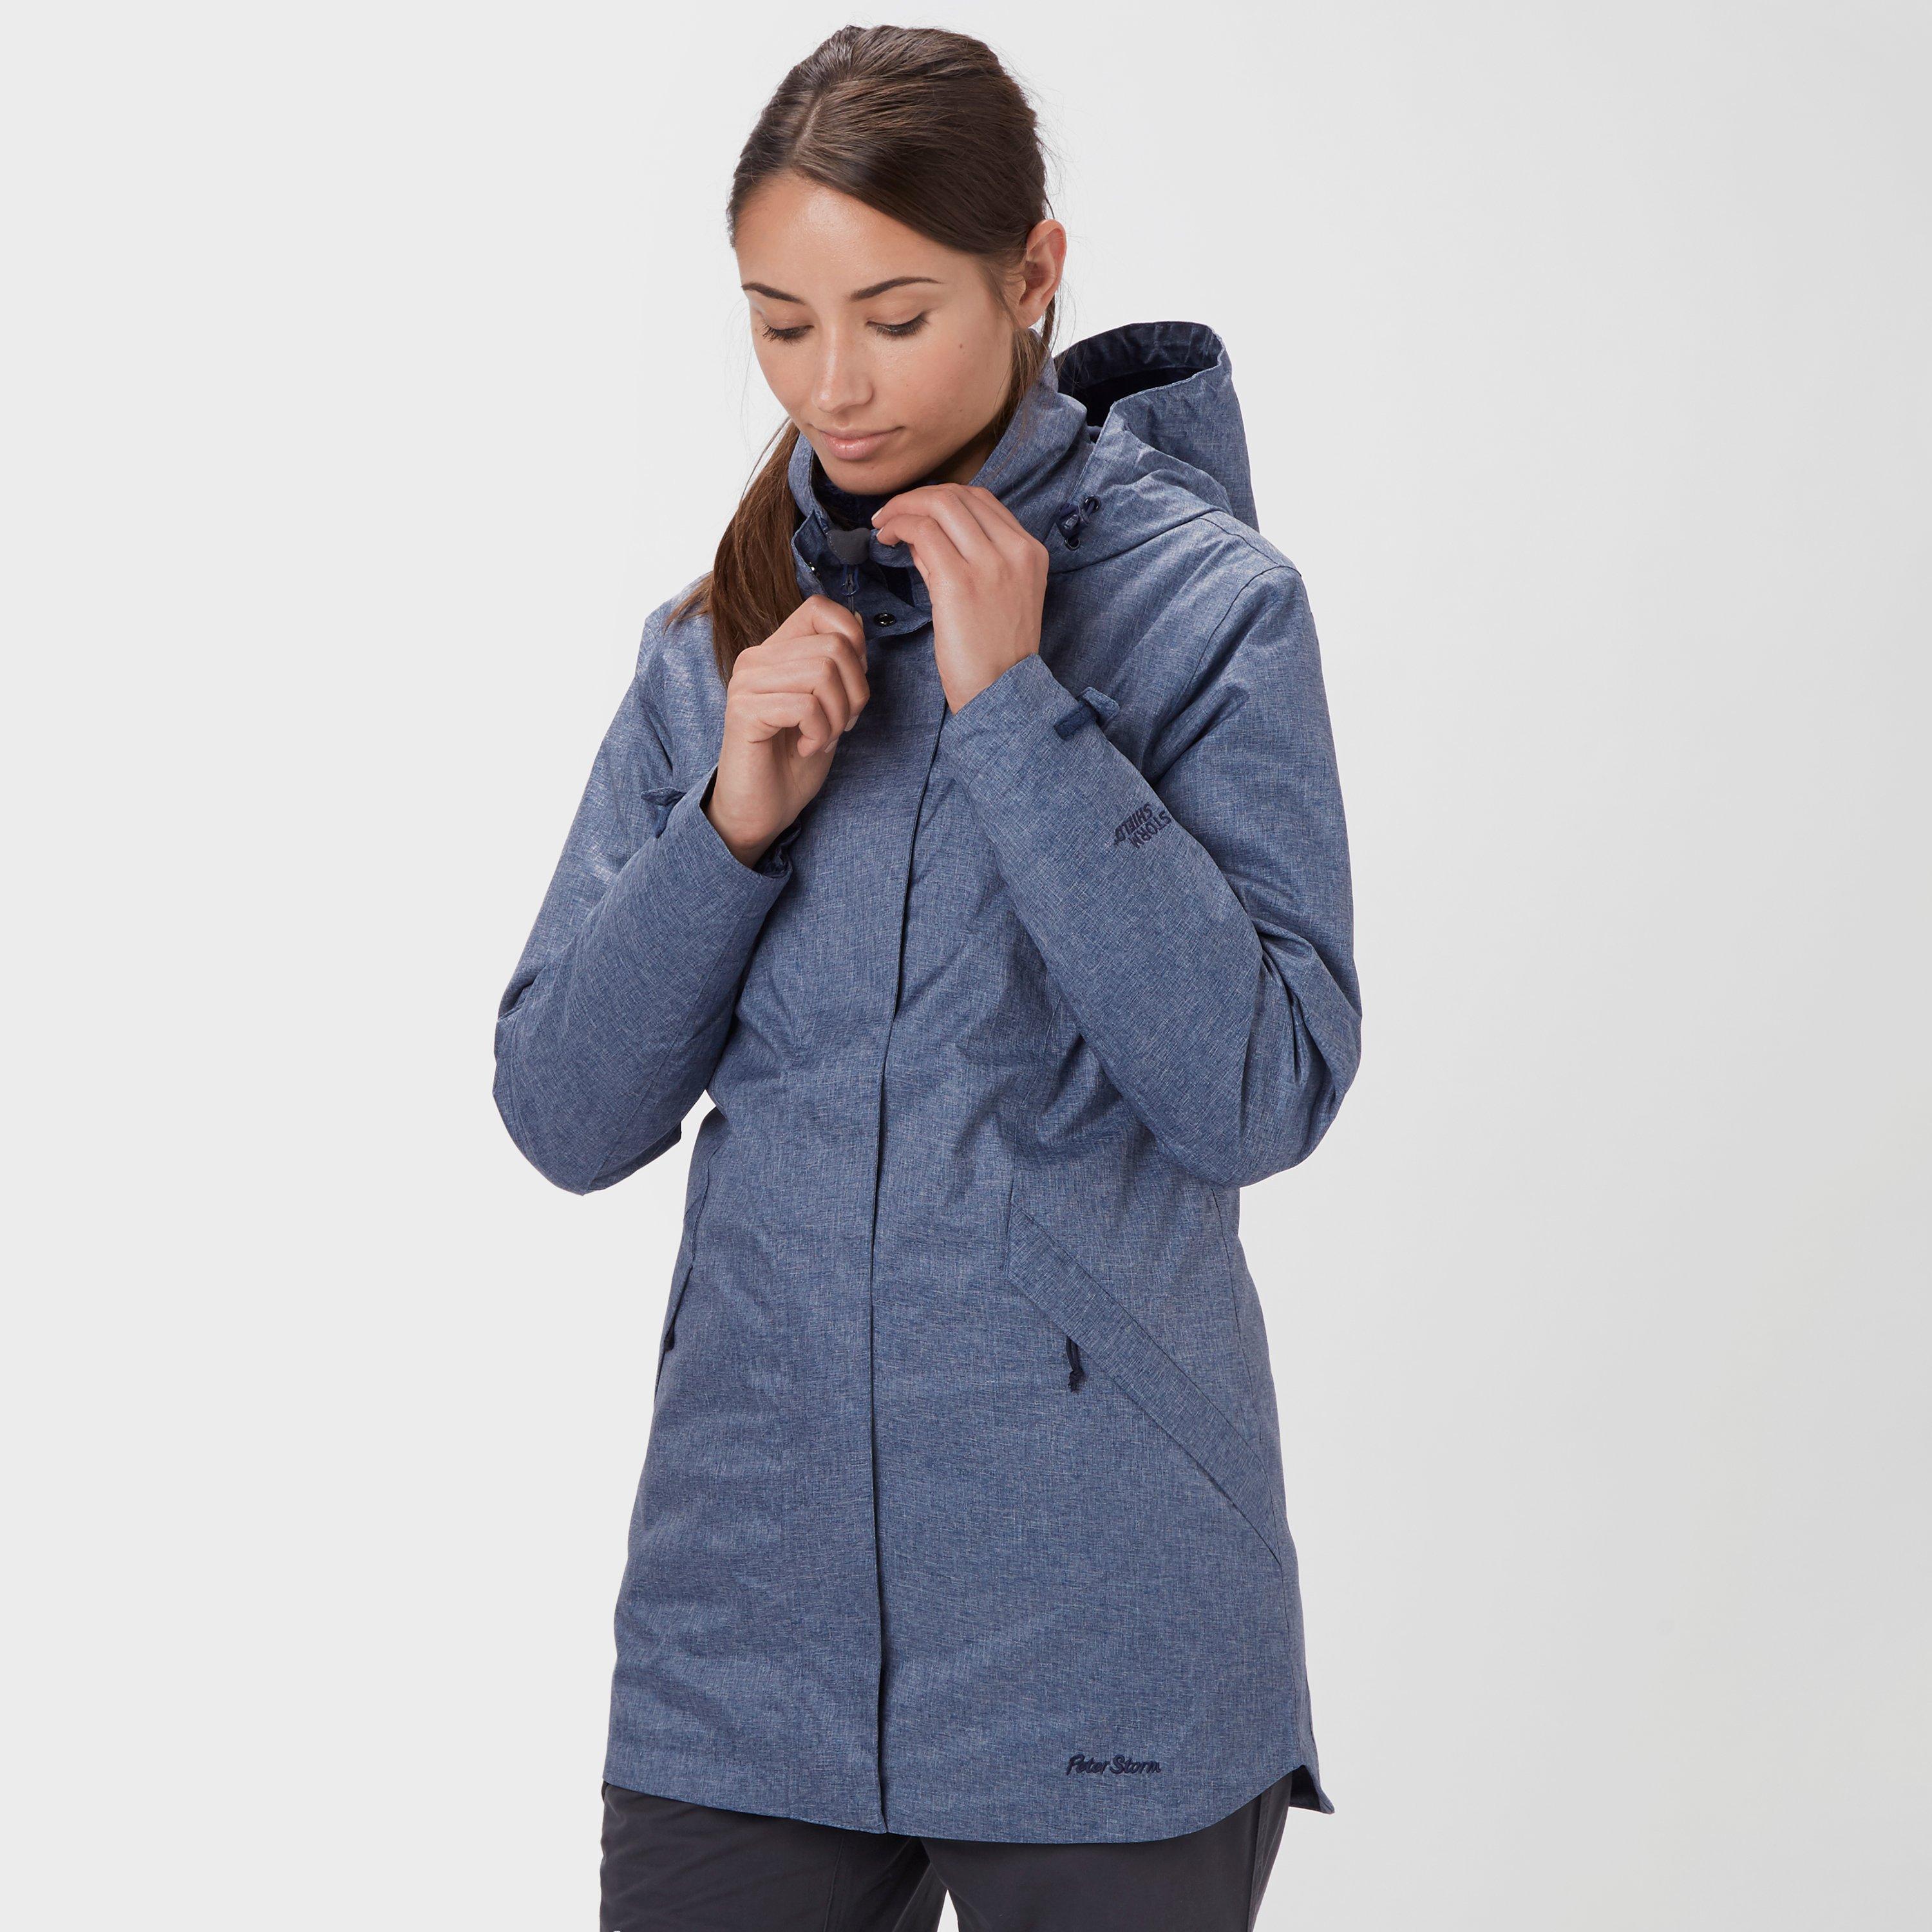 Peter Storm Womens Mistral Jacket - Navy/nvy  Navy/nvy